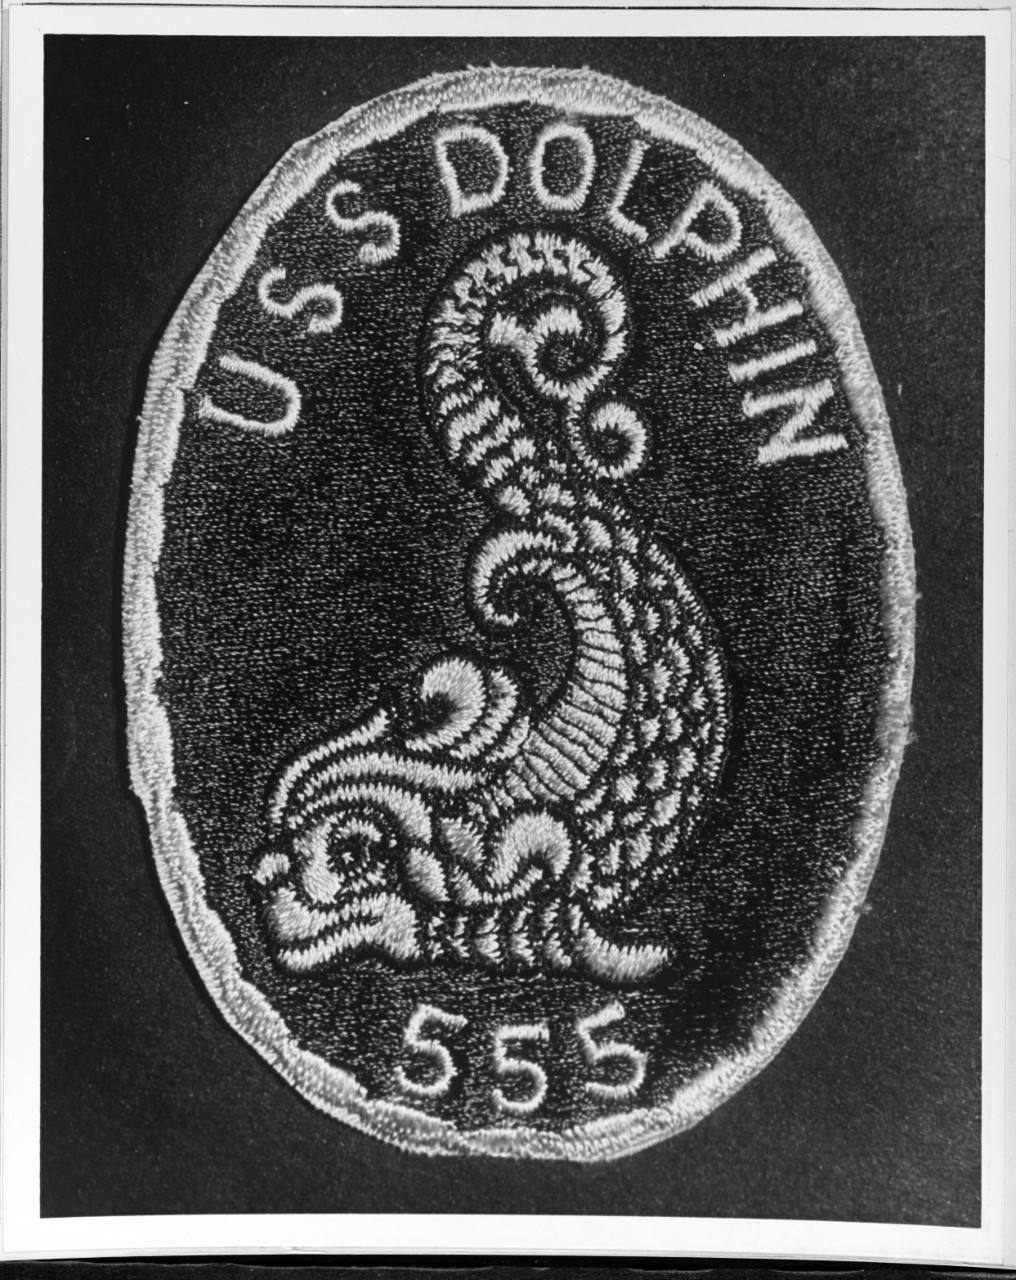 Insignia (patch): USS DOLPHIN (AGSS-555)